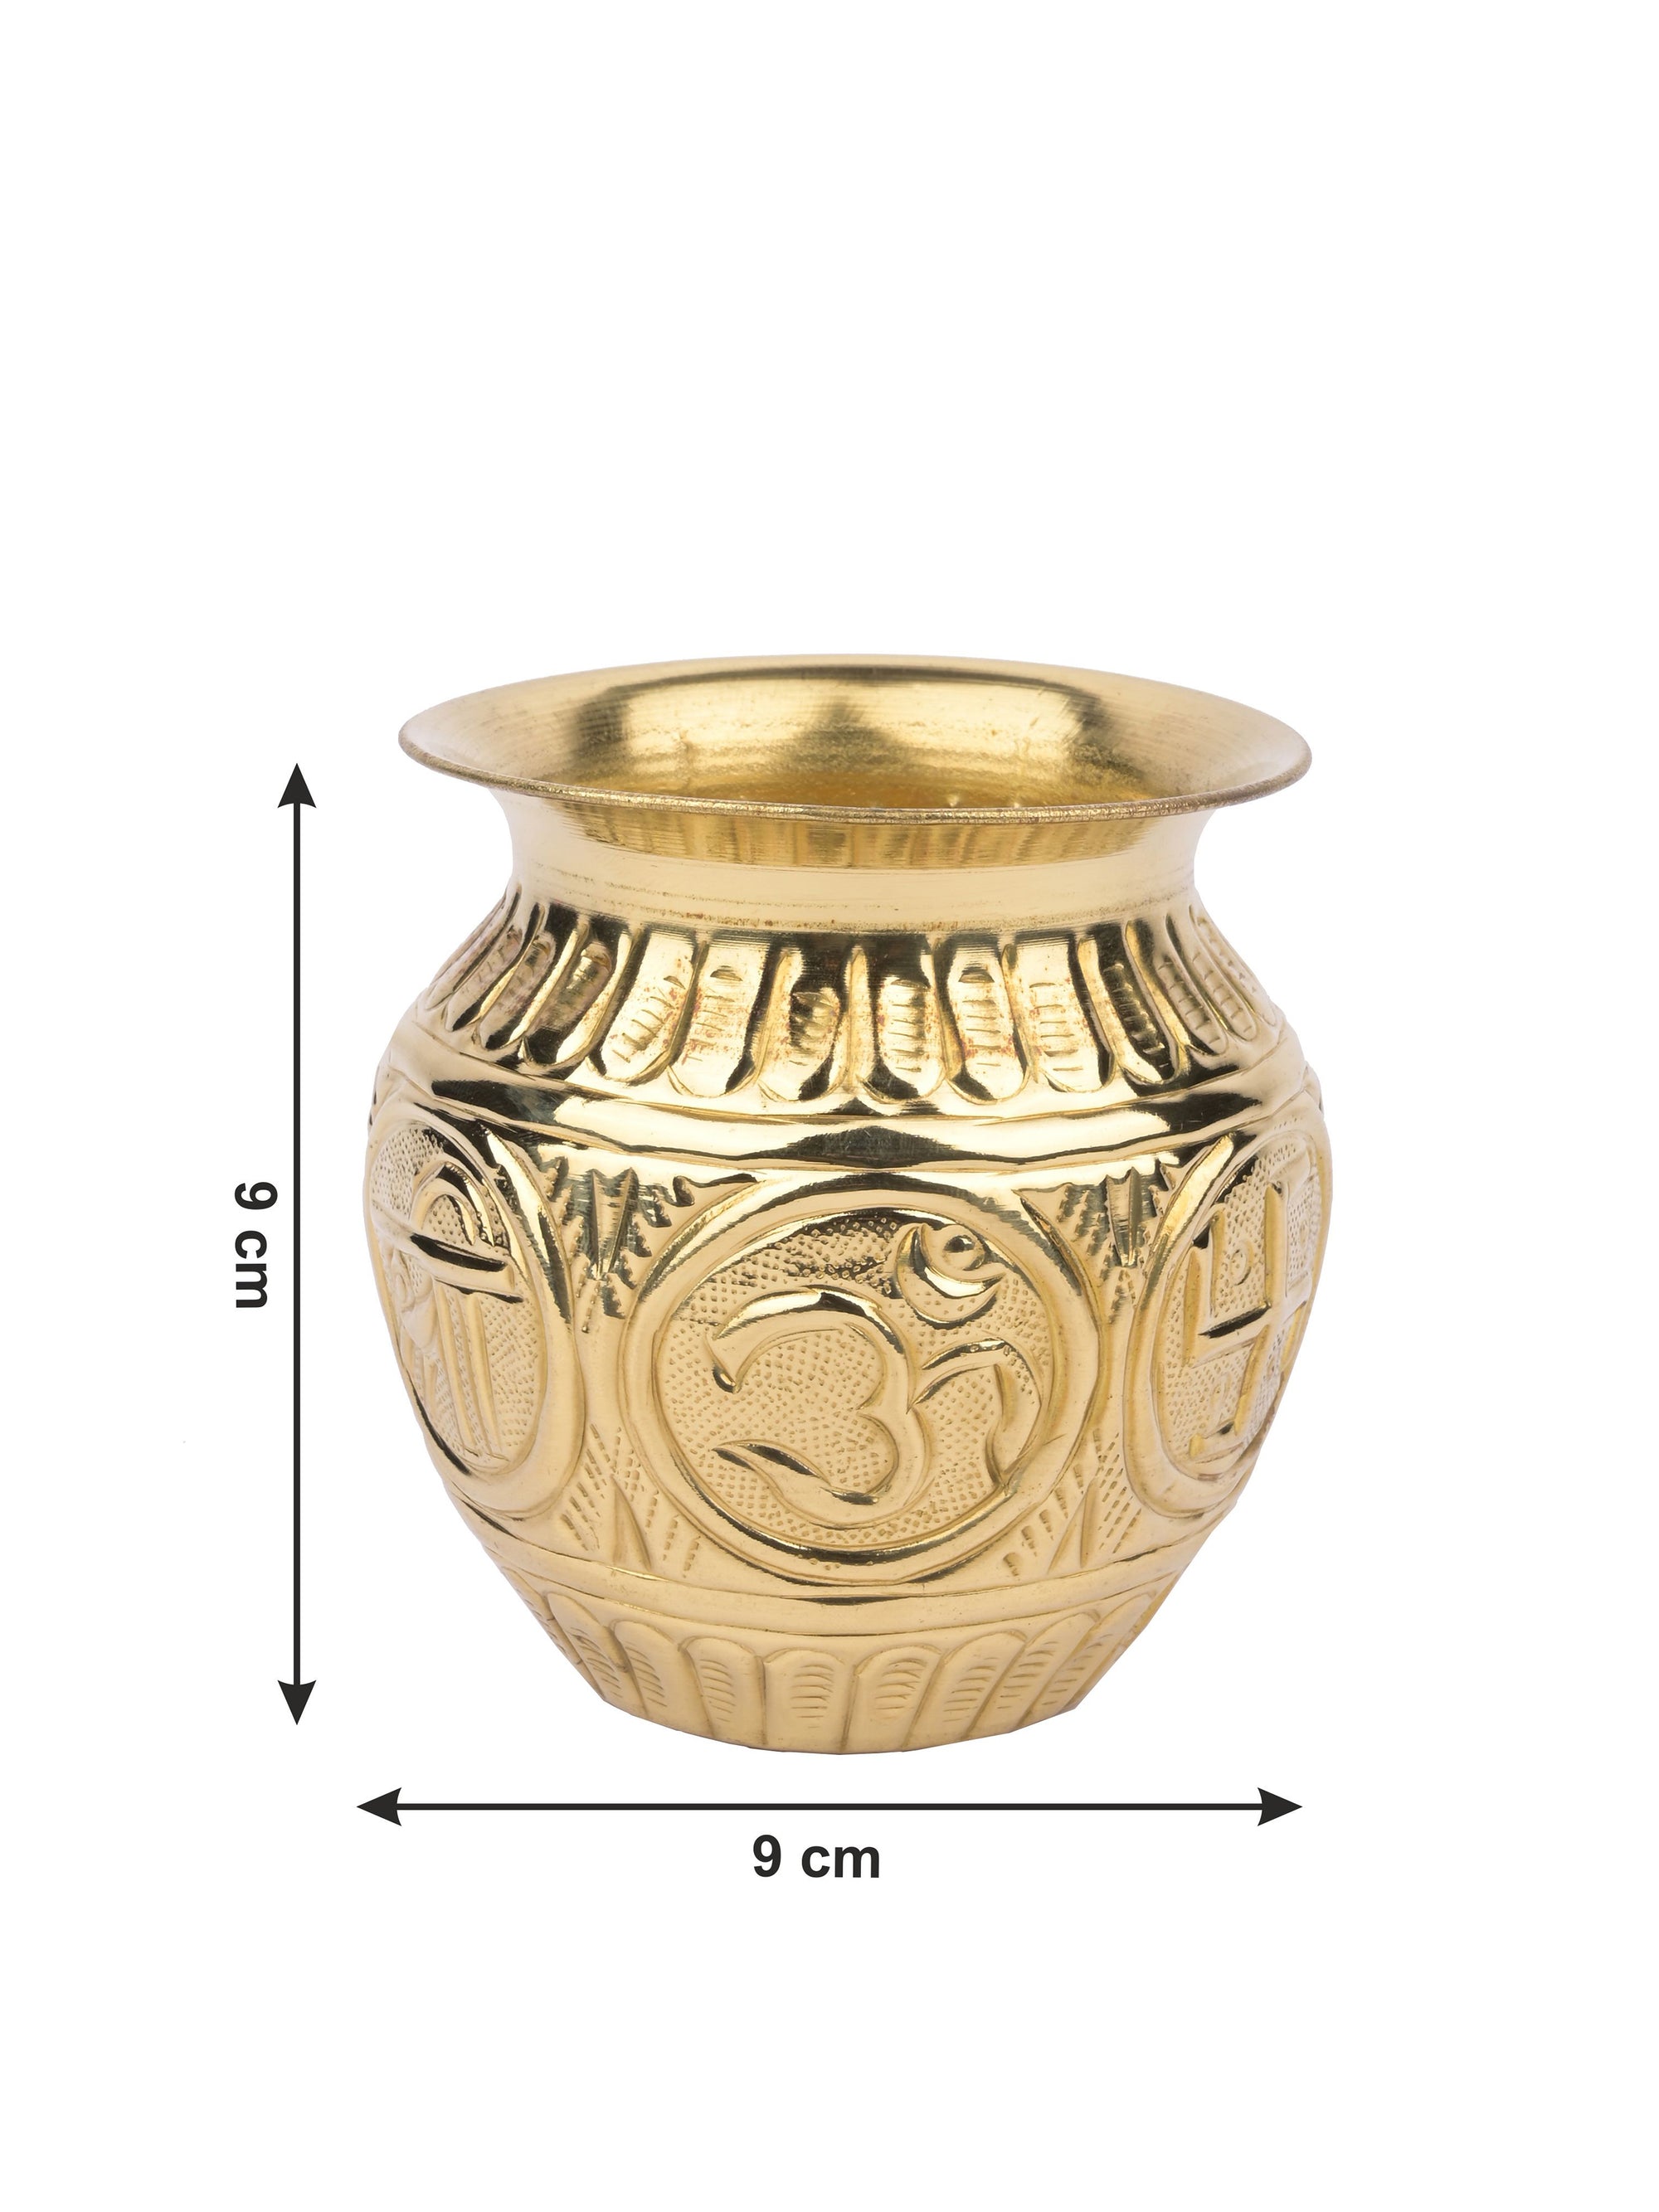 Small Puja Kalash / Lota made of Brass with Om and Swastik embossed - The Heritage Artifacts